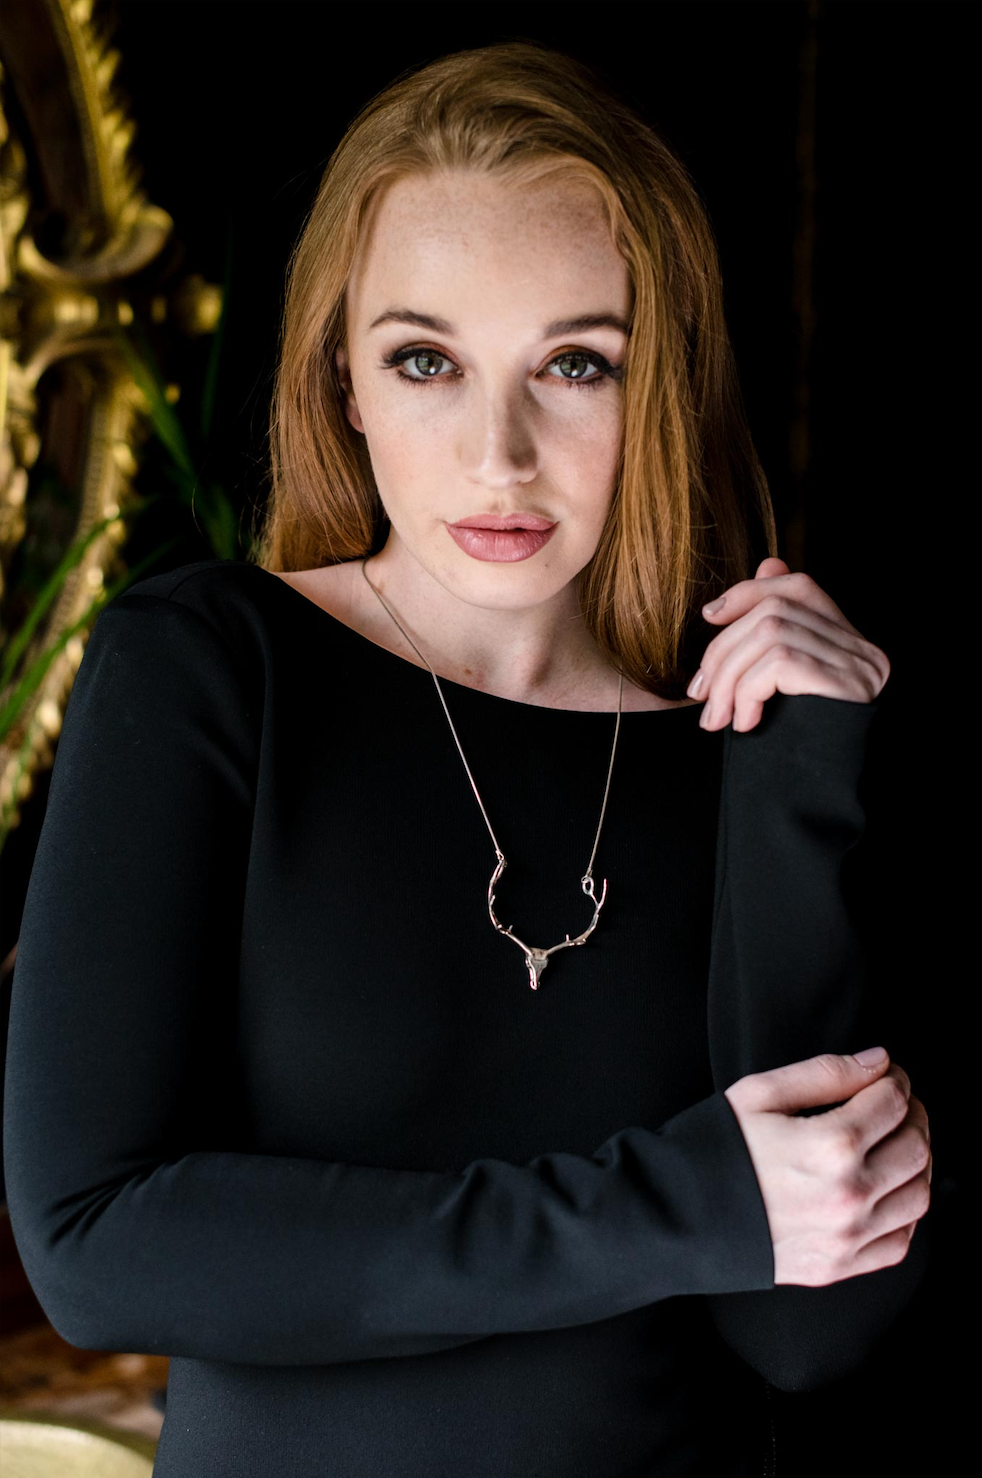 The NI Silver Jewellery Irish Elk antler necklace design made in sterling silver being worn by a model.